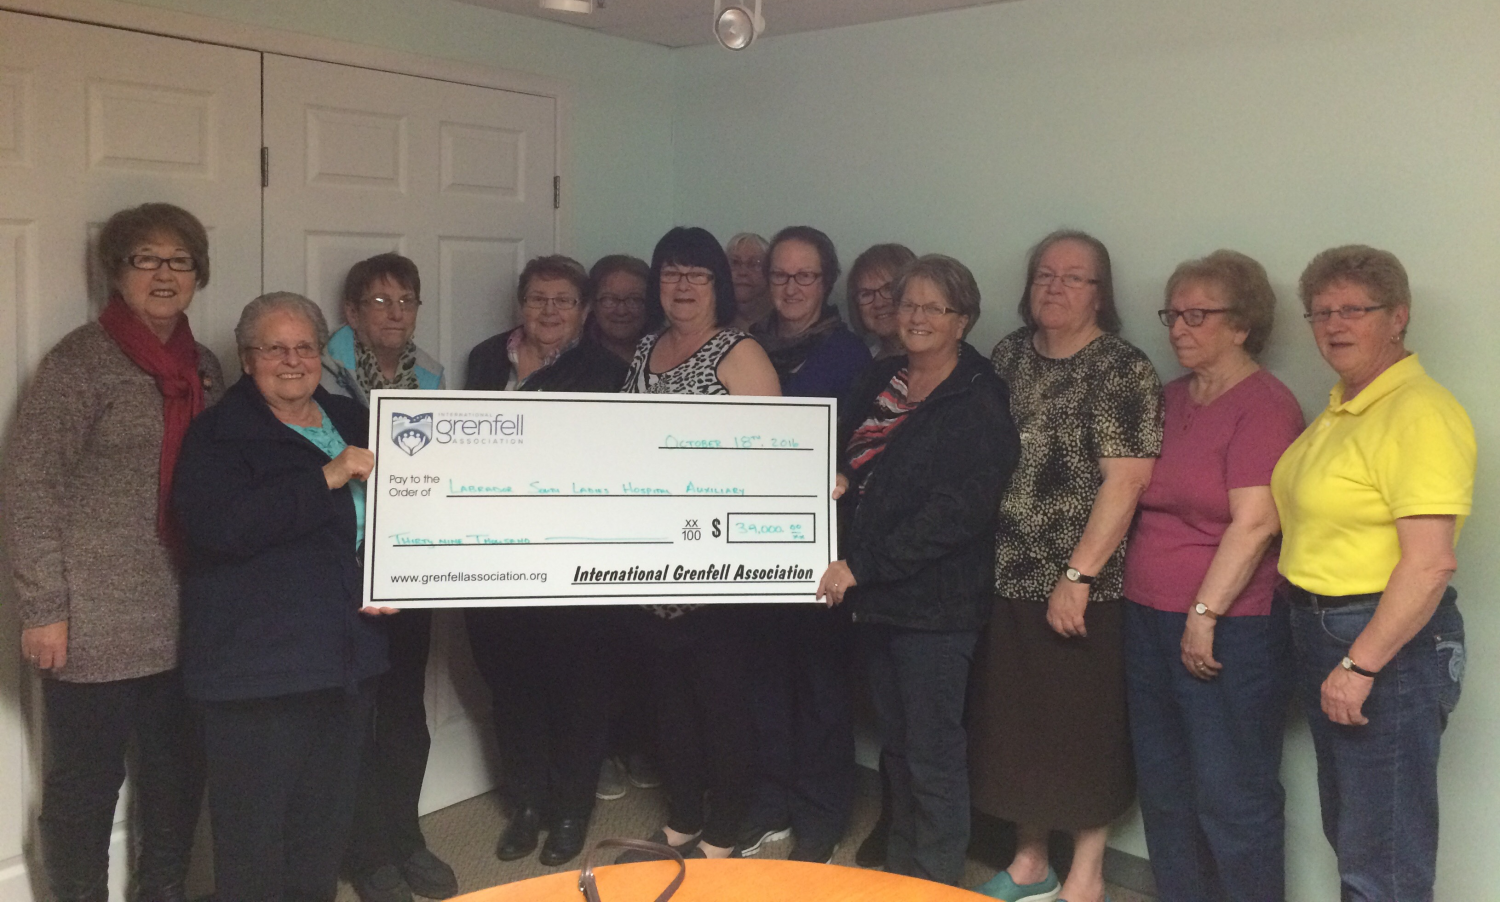 Labrador South Ladies Hospital Auxiliary: Excellent Care for All